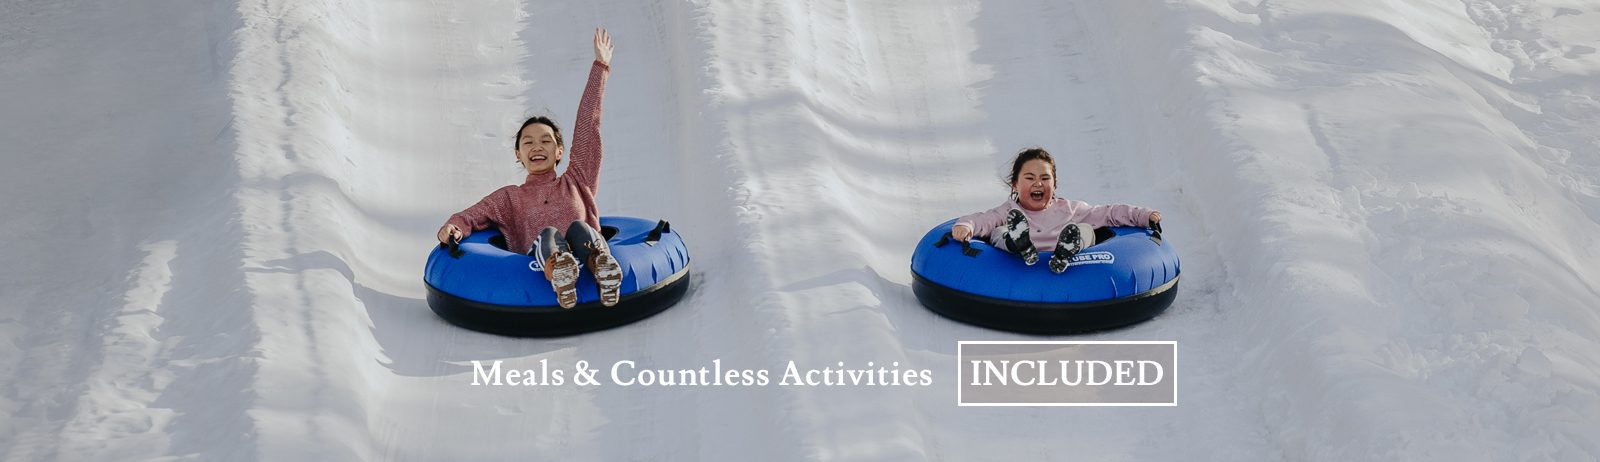 Image of two children smiling, sliding down a snow covered hill on snow tubes